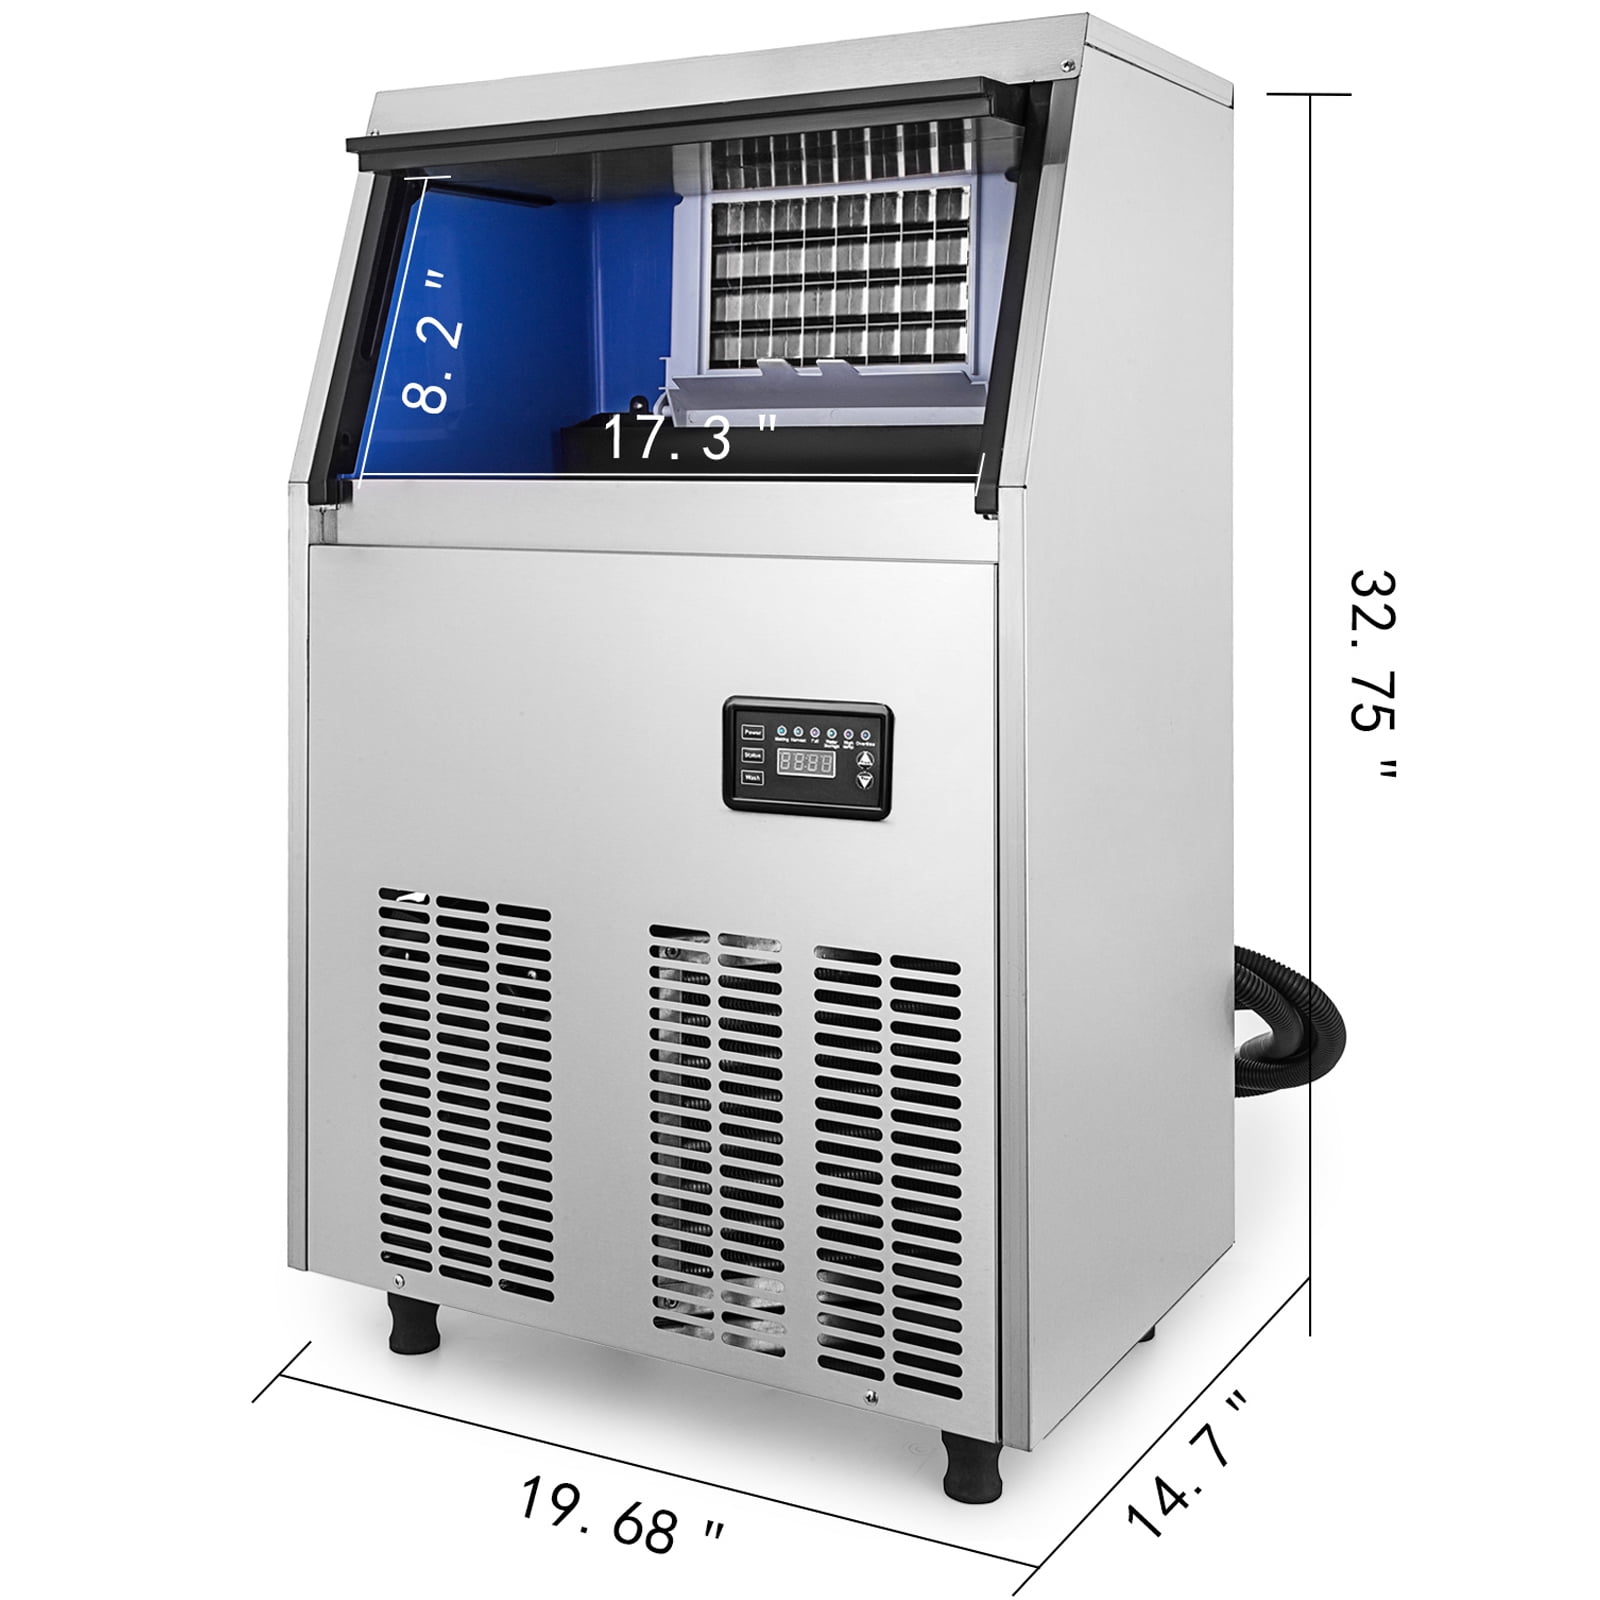 TECSPACE 110V Commercial Ice Maker 550LBS/24H，Ice Machine with